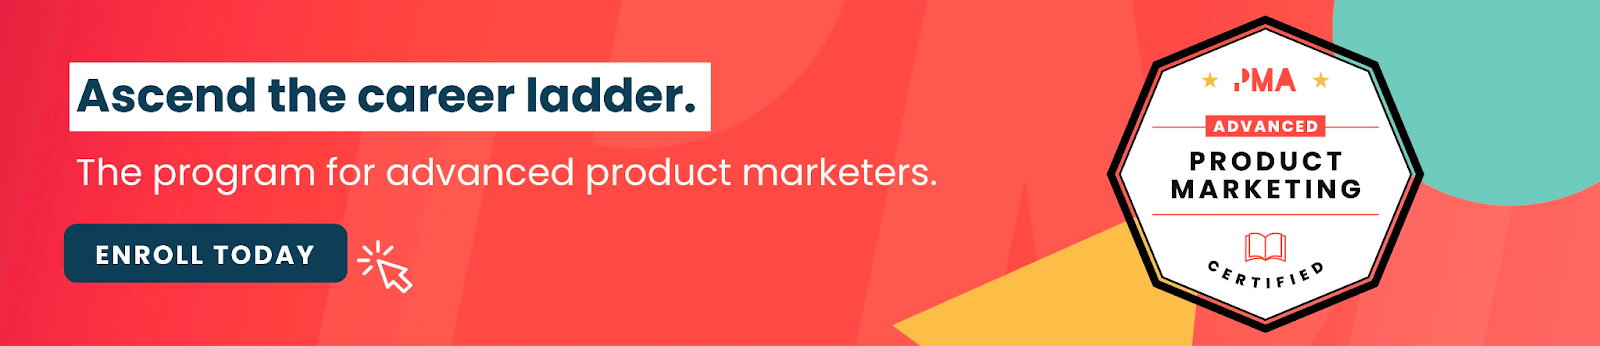 Advanced Product Marketing: Certified – The program for advanced product marketers